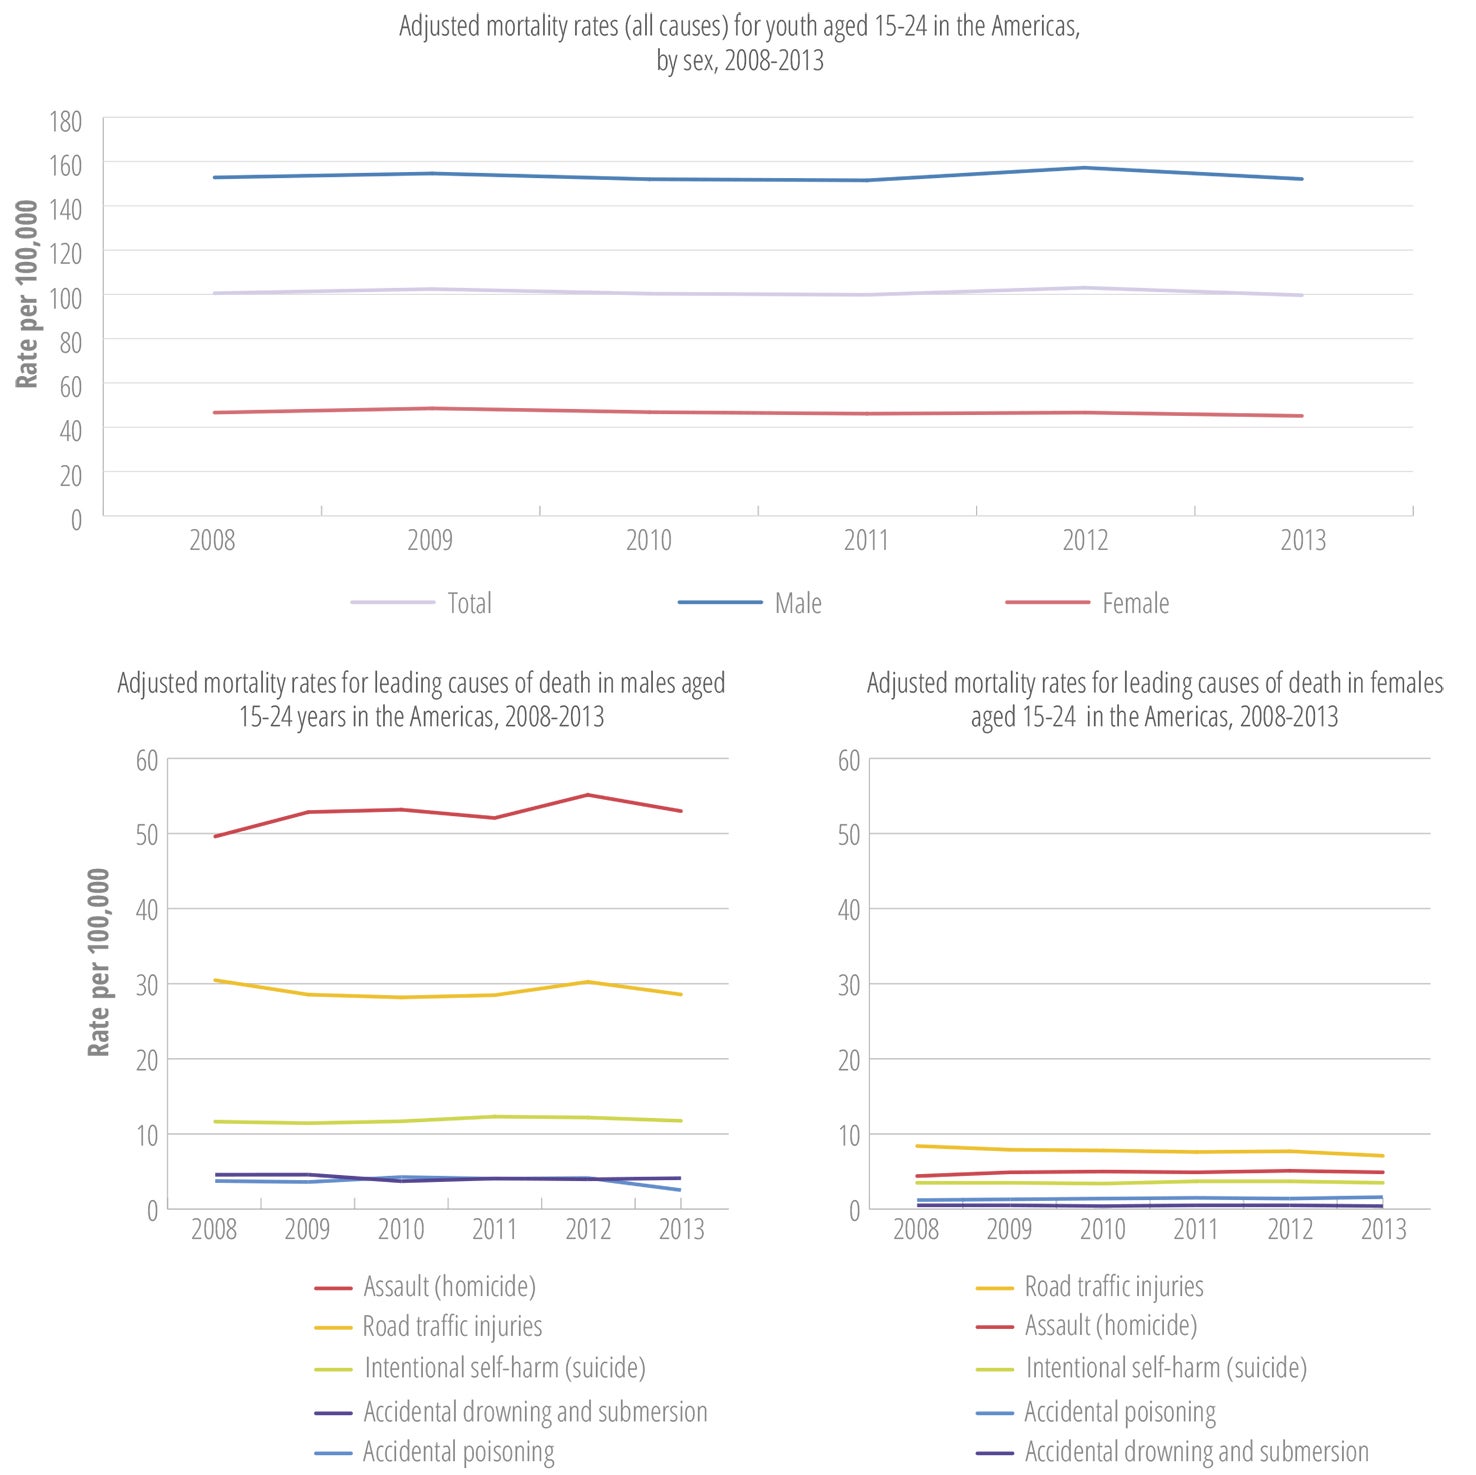 Mortality trends in males and females aged 15-24 years in the Americas, 2008-2013